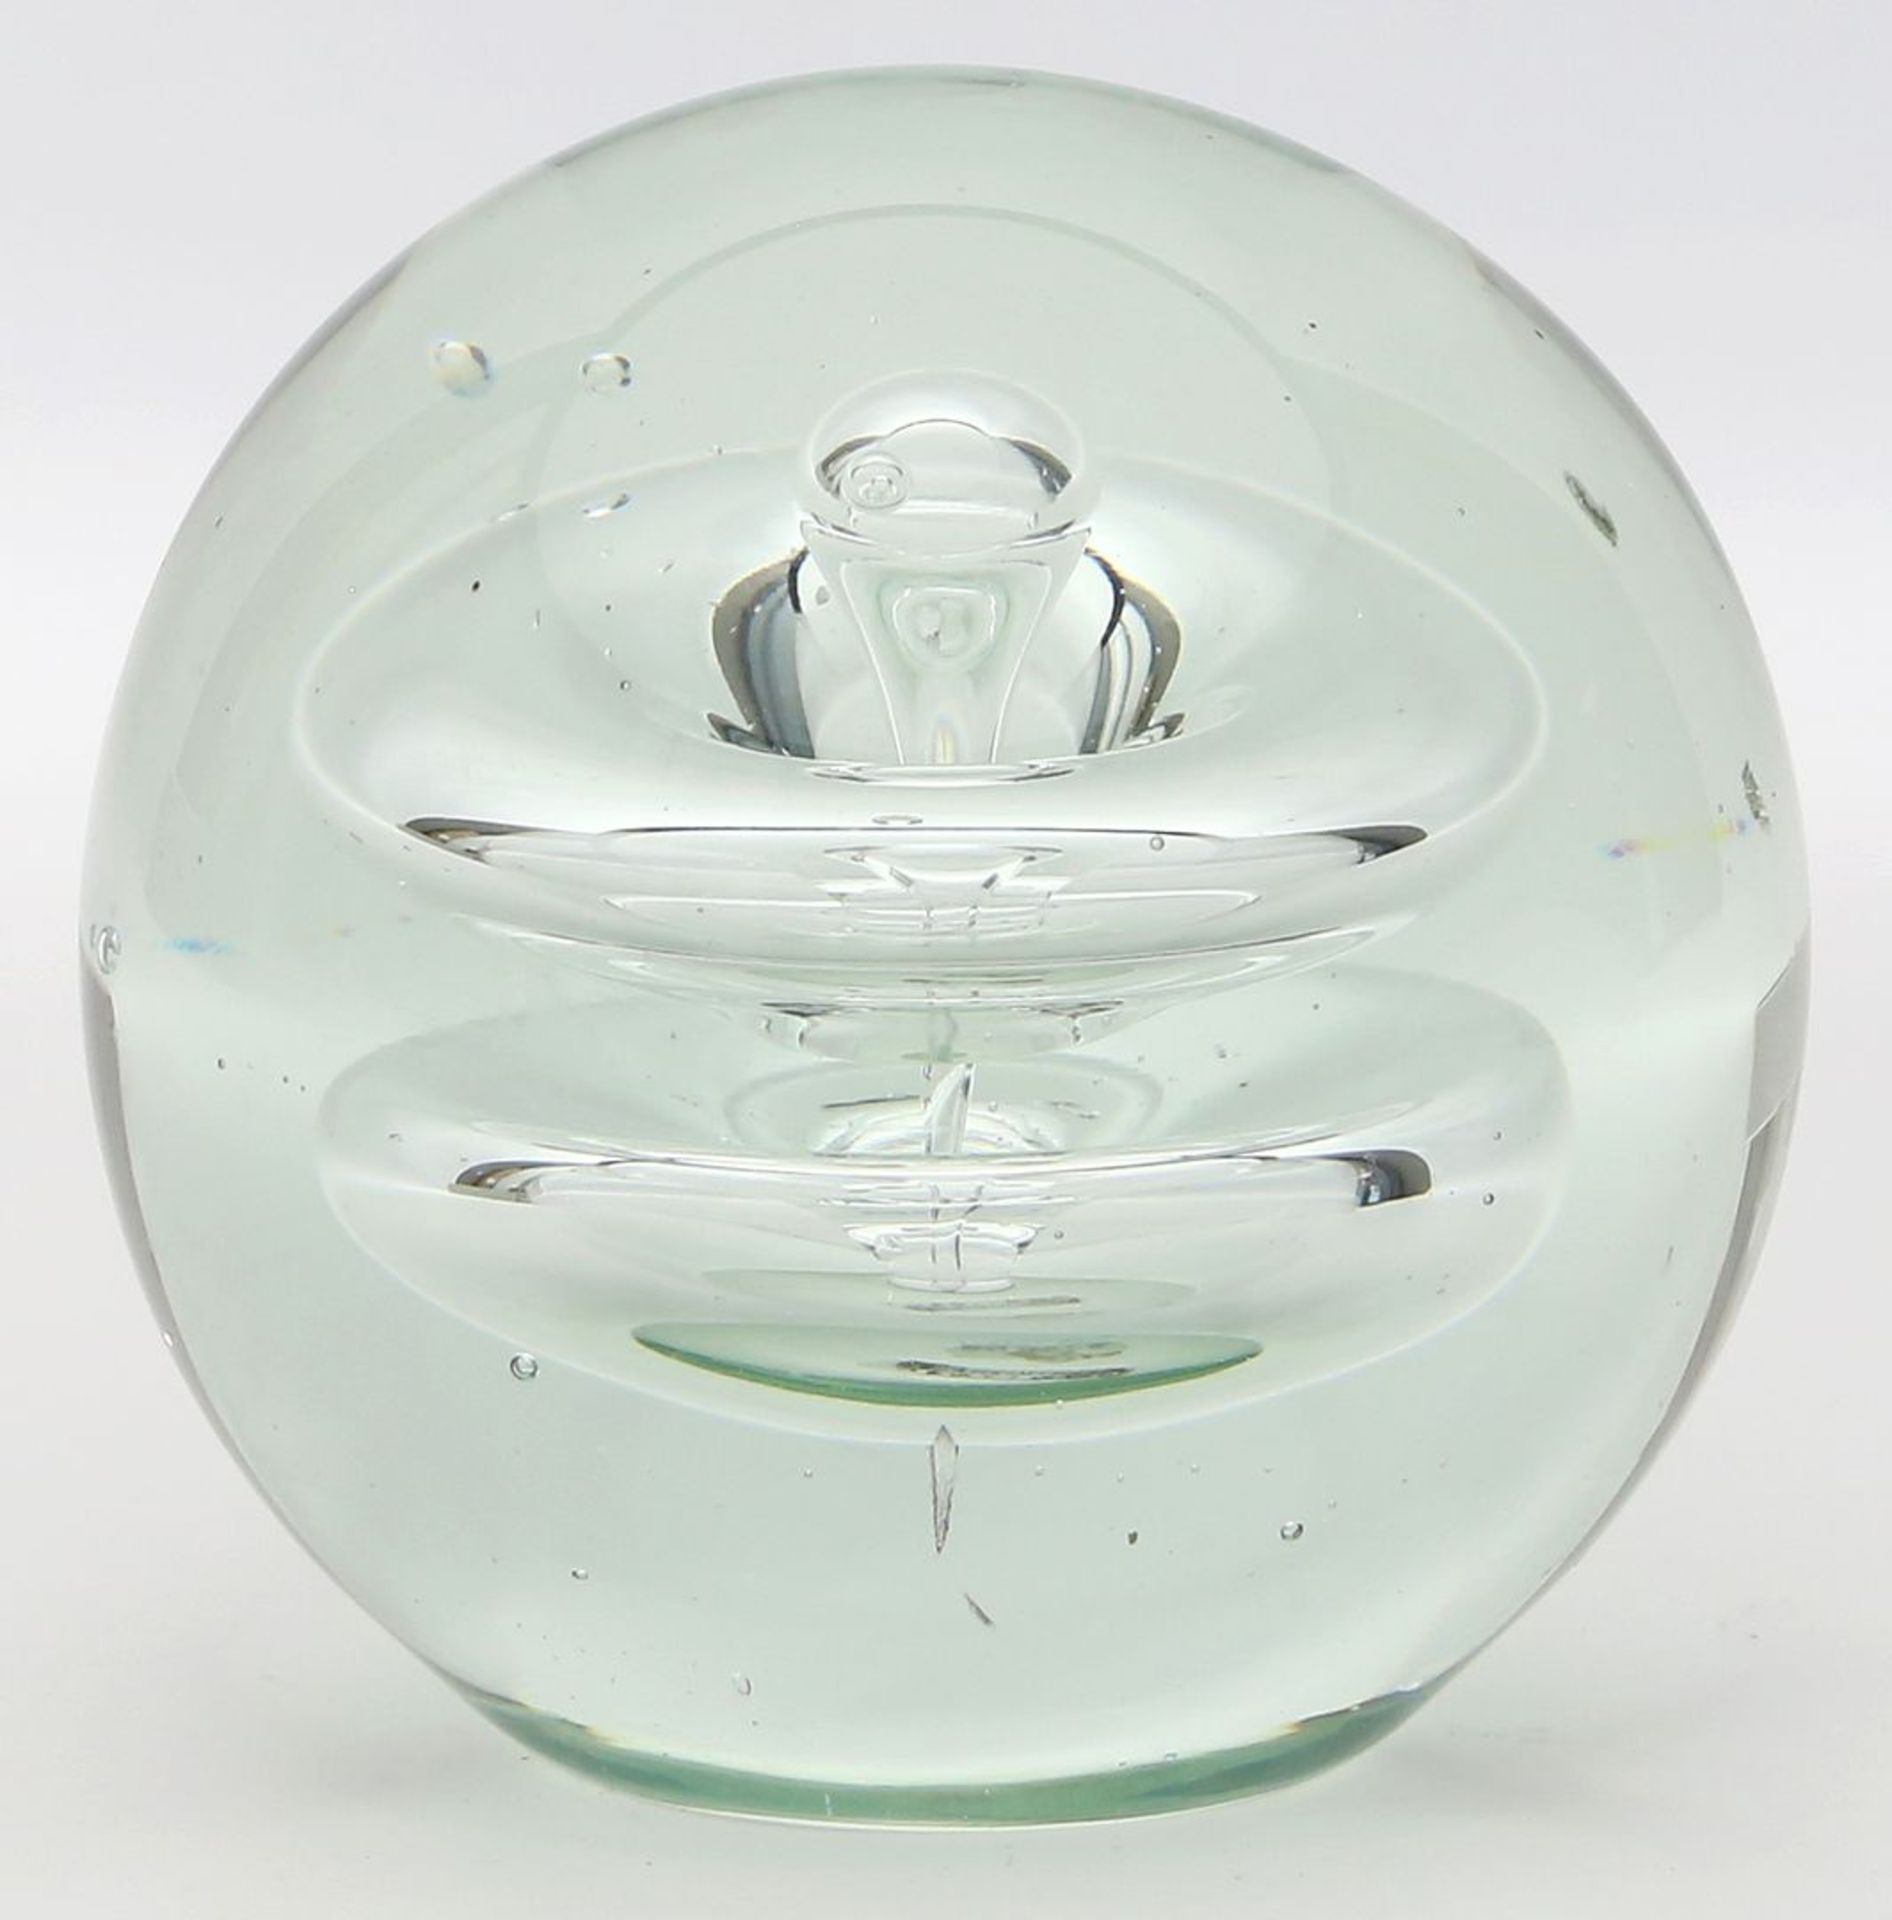 Großes Paperweight.